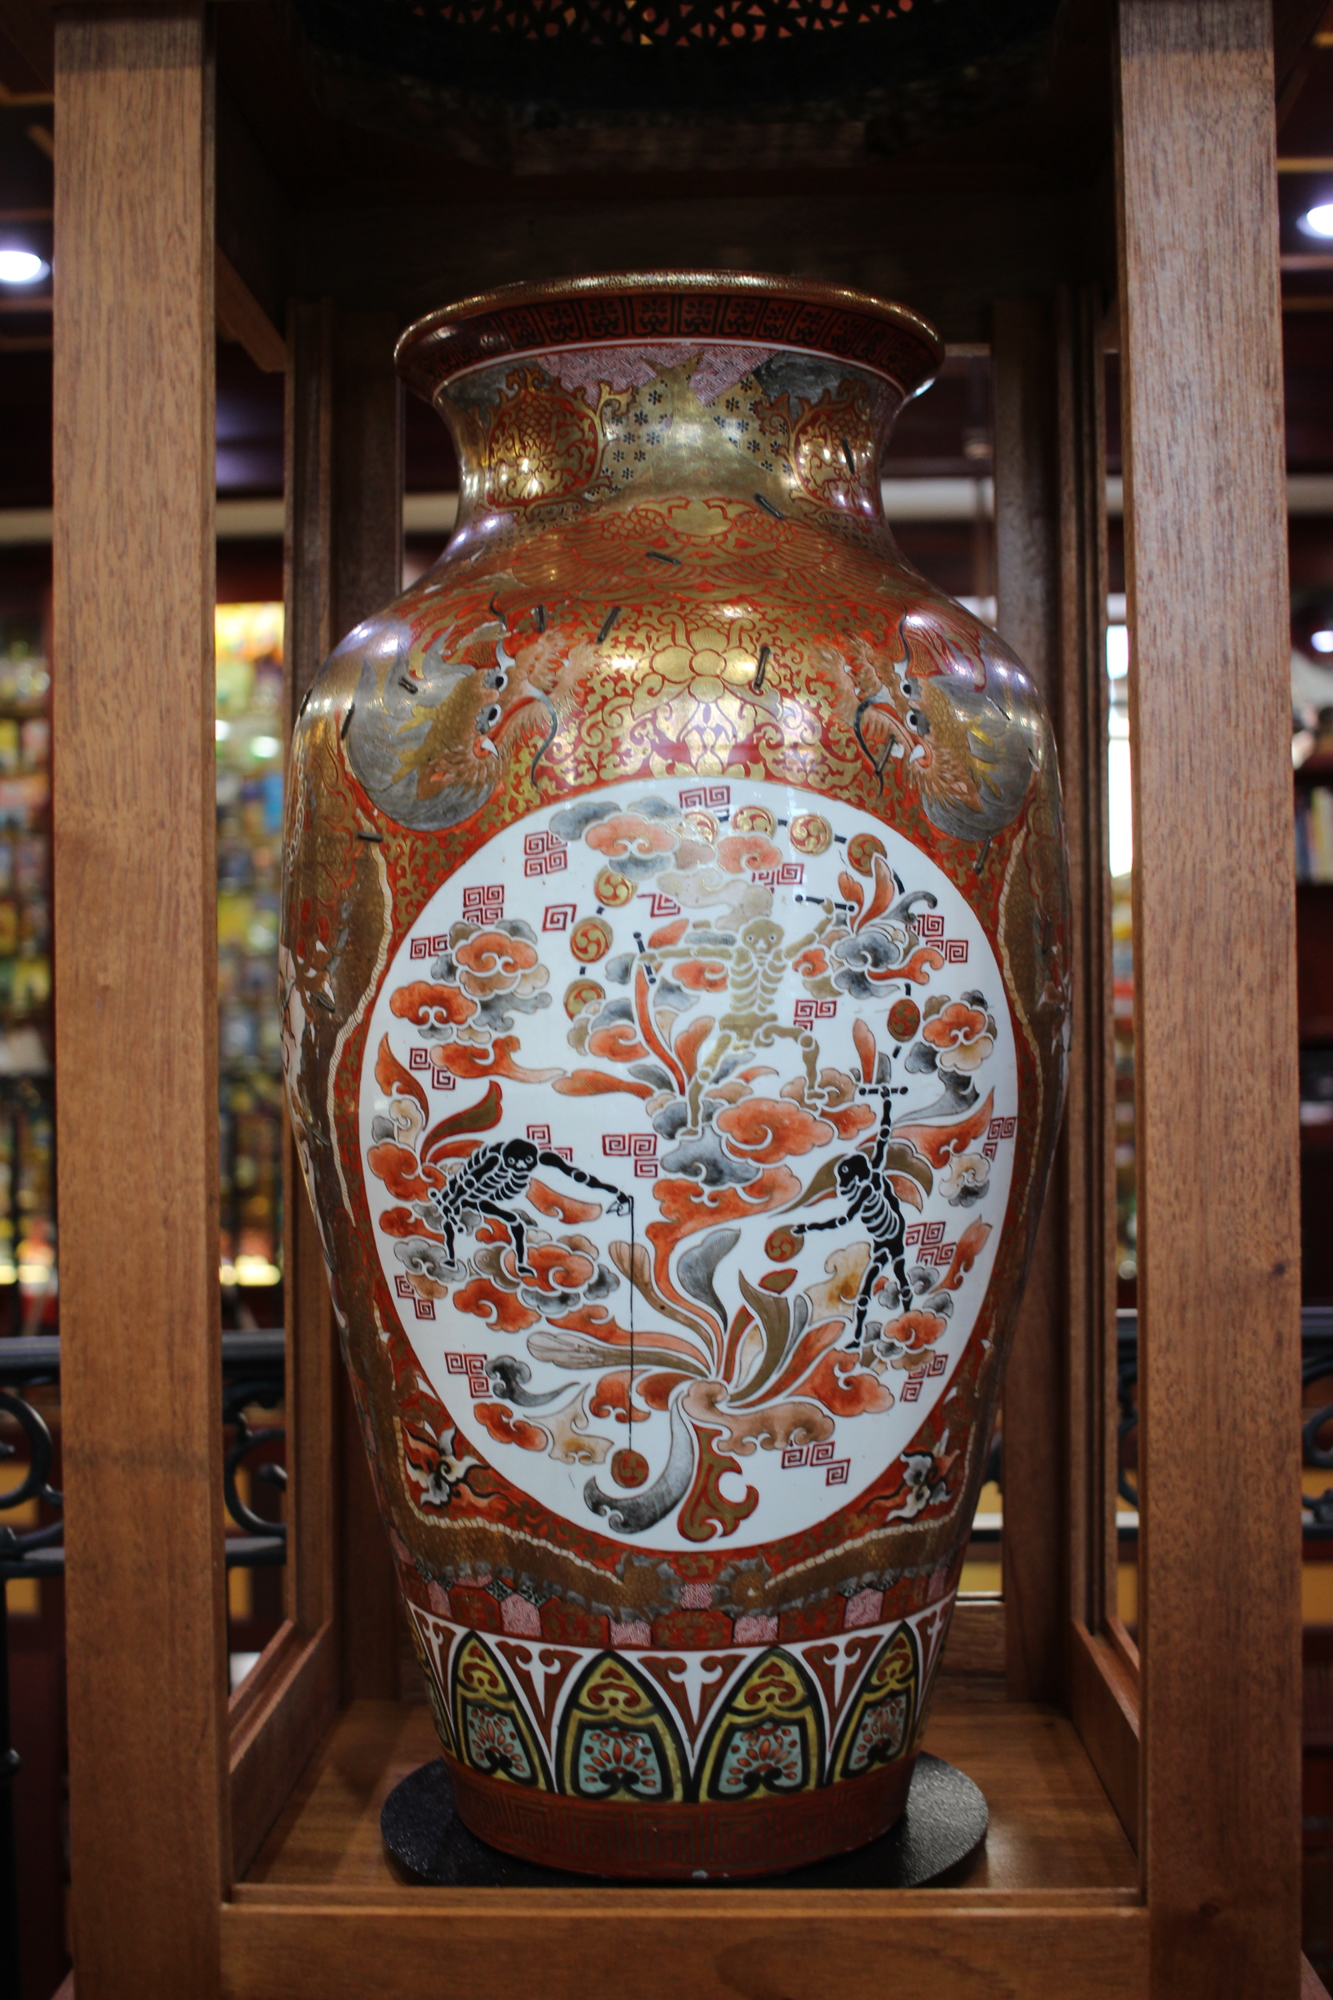 This vase is one of the oldest pieces of artwork to depict a yo-yo being played.